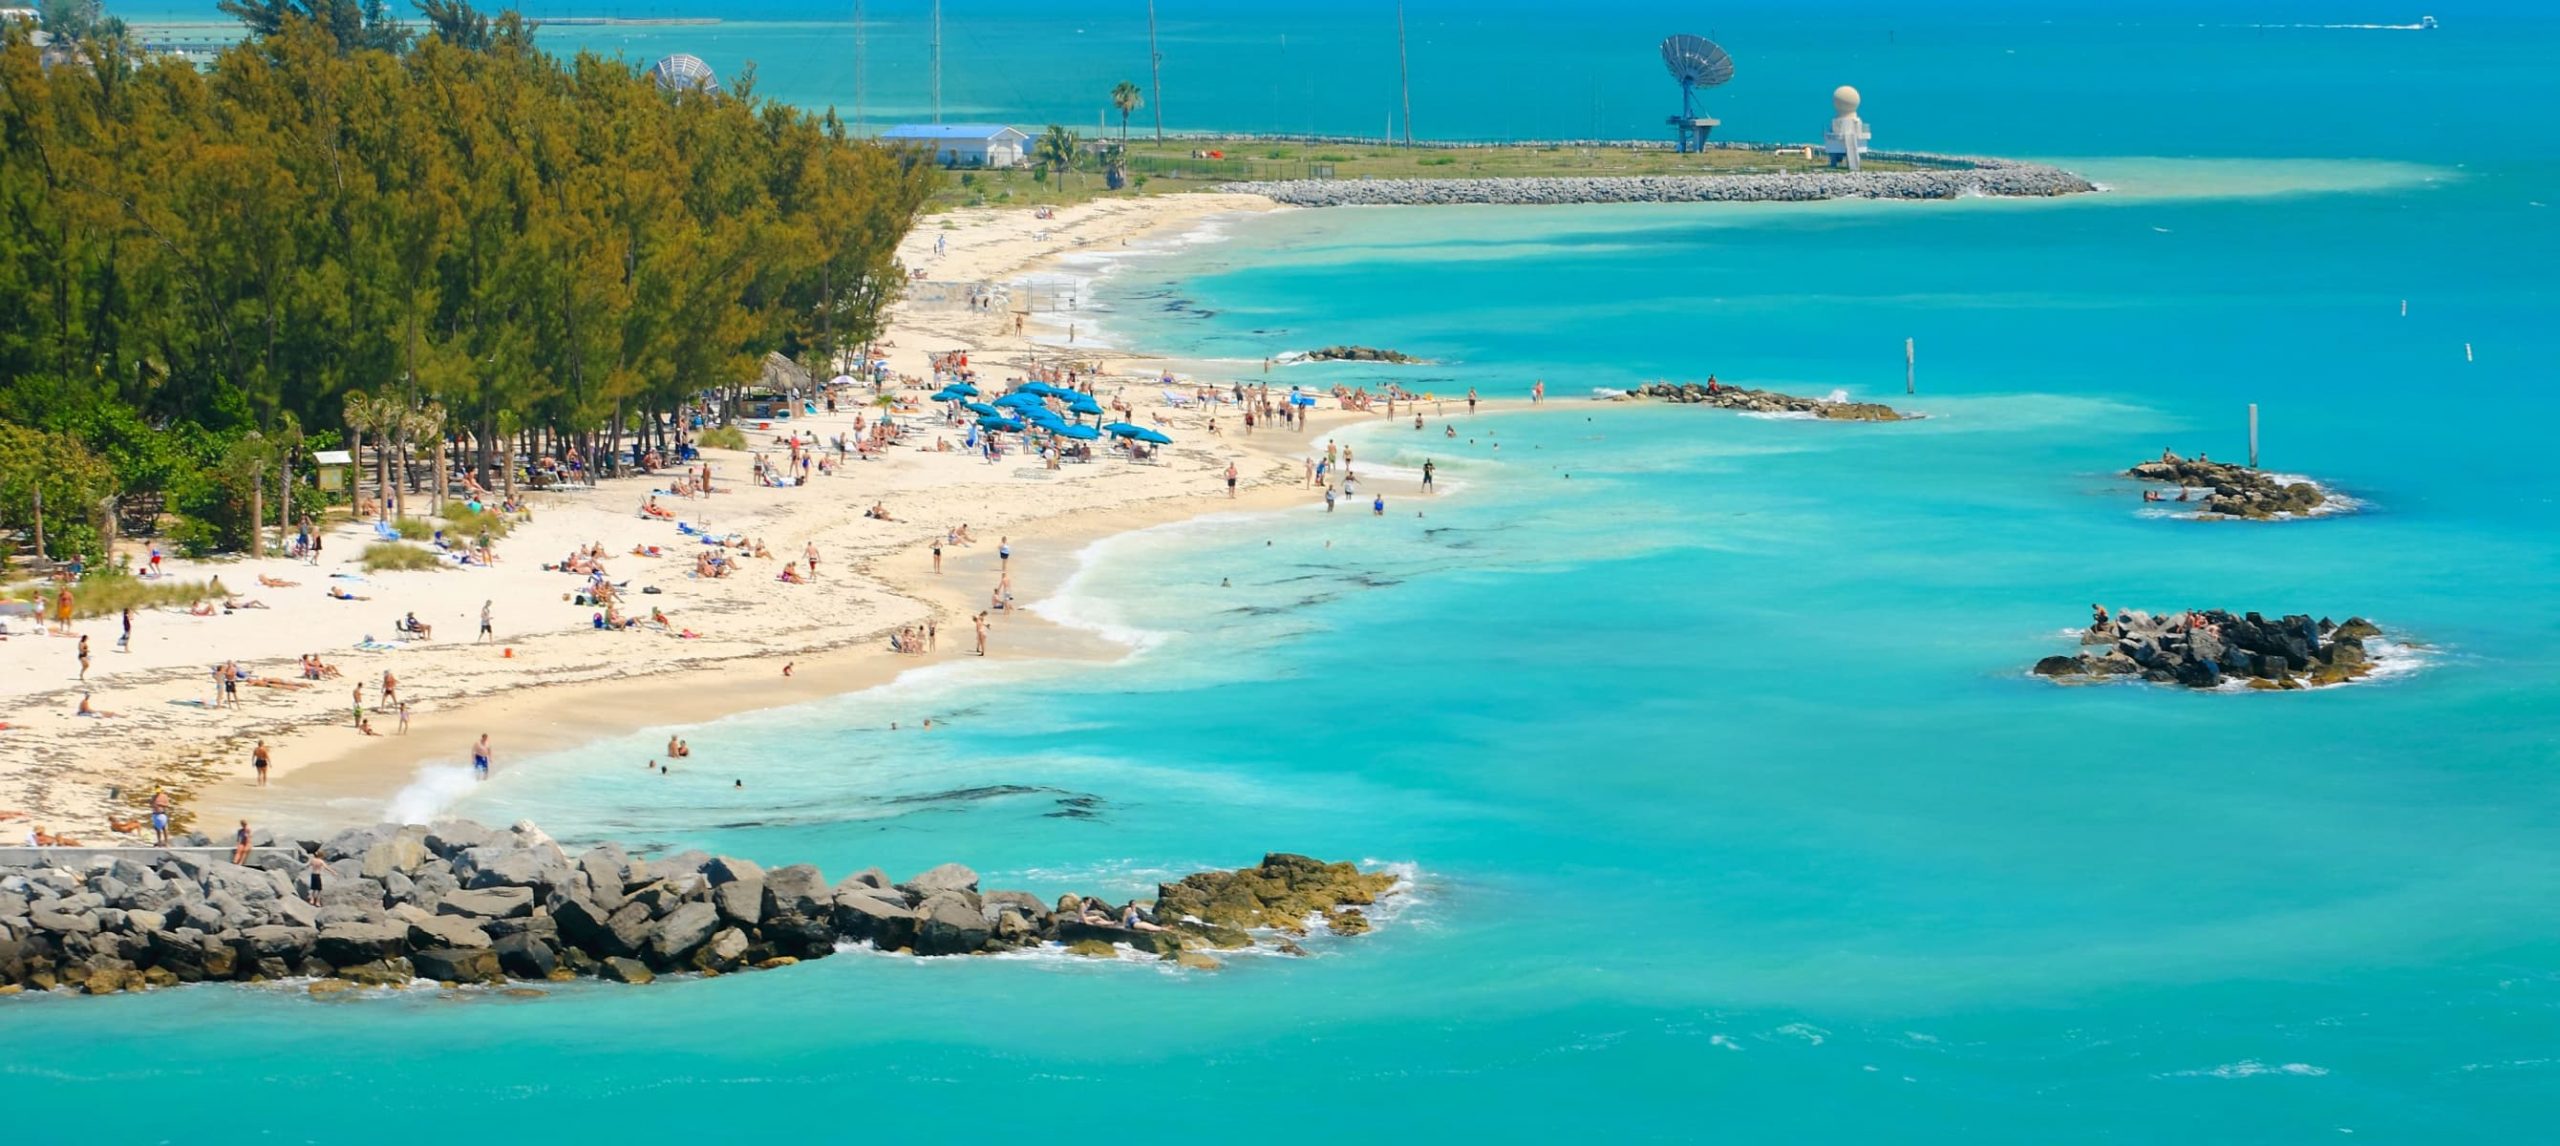 The 15 Best Things to do in Key West, Florida